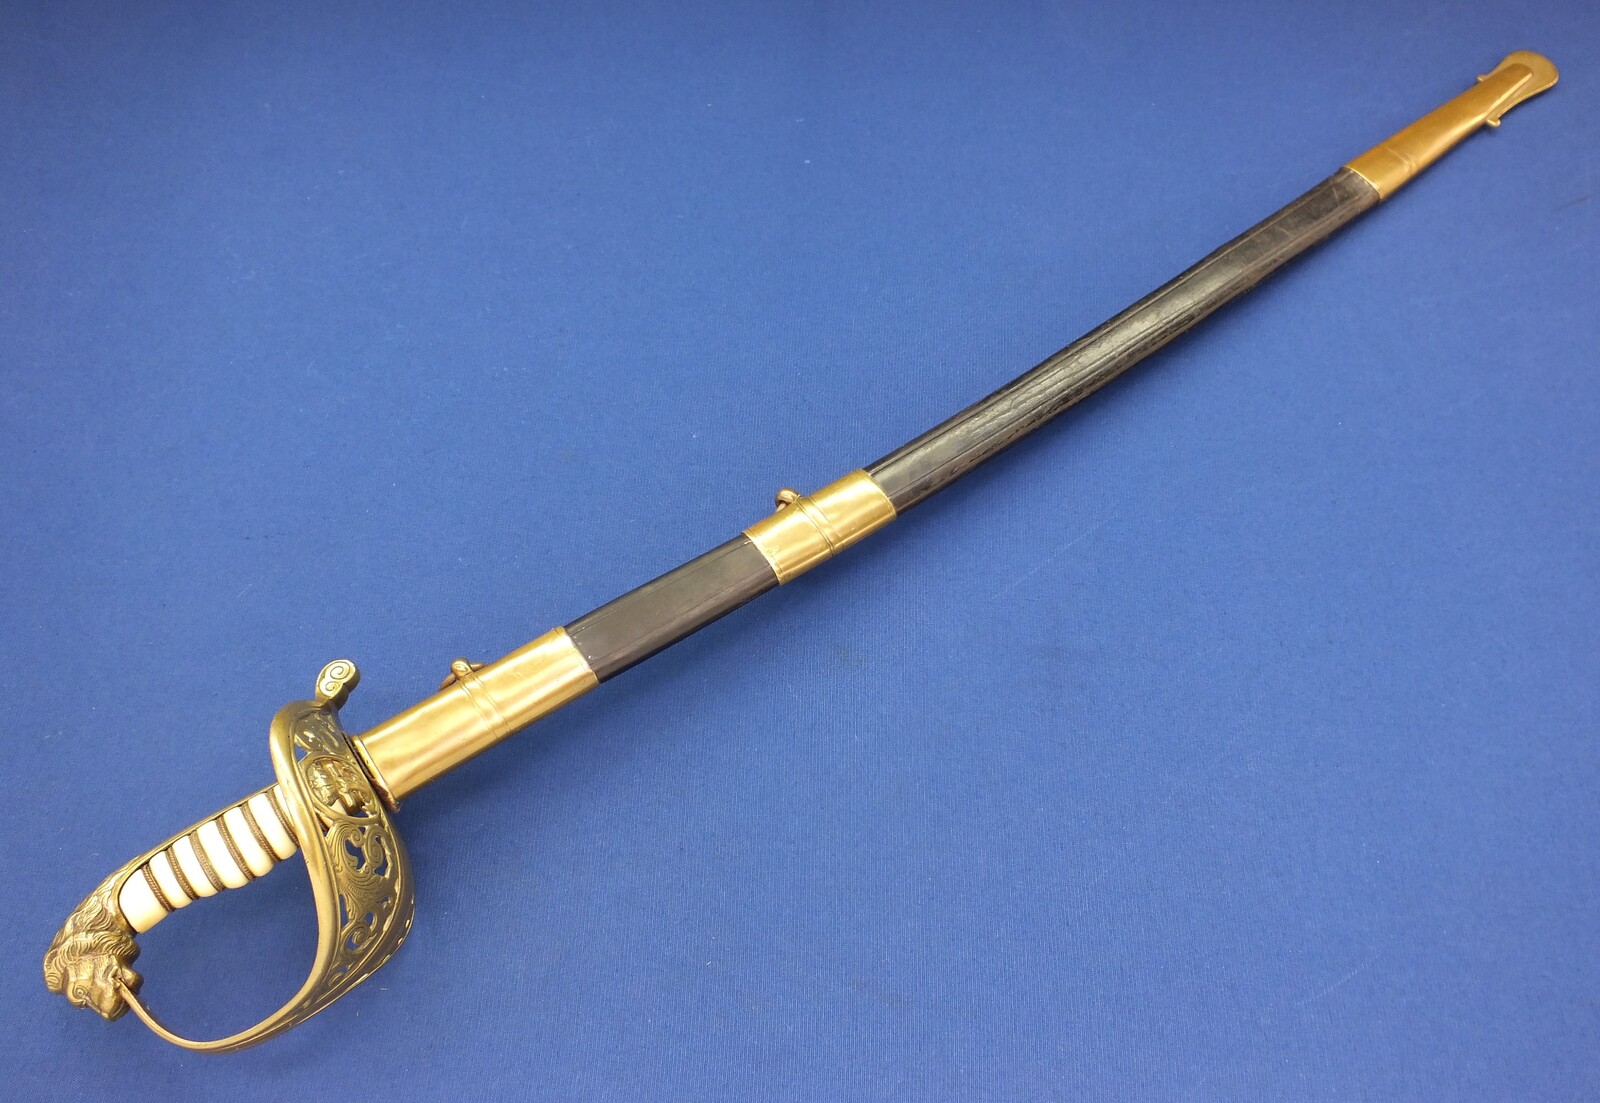 A very nice antique Dutch Naval Officers Sword Model 1882 